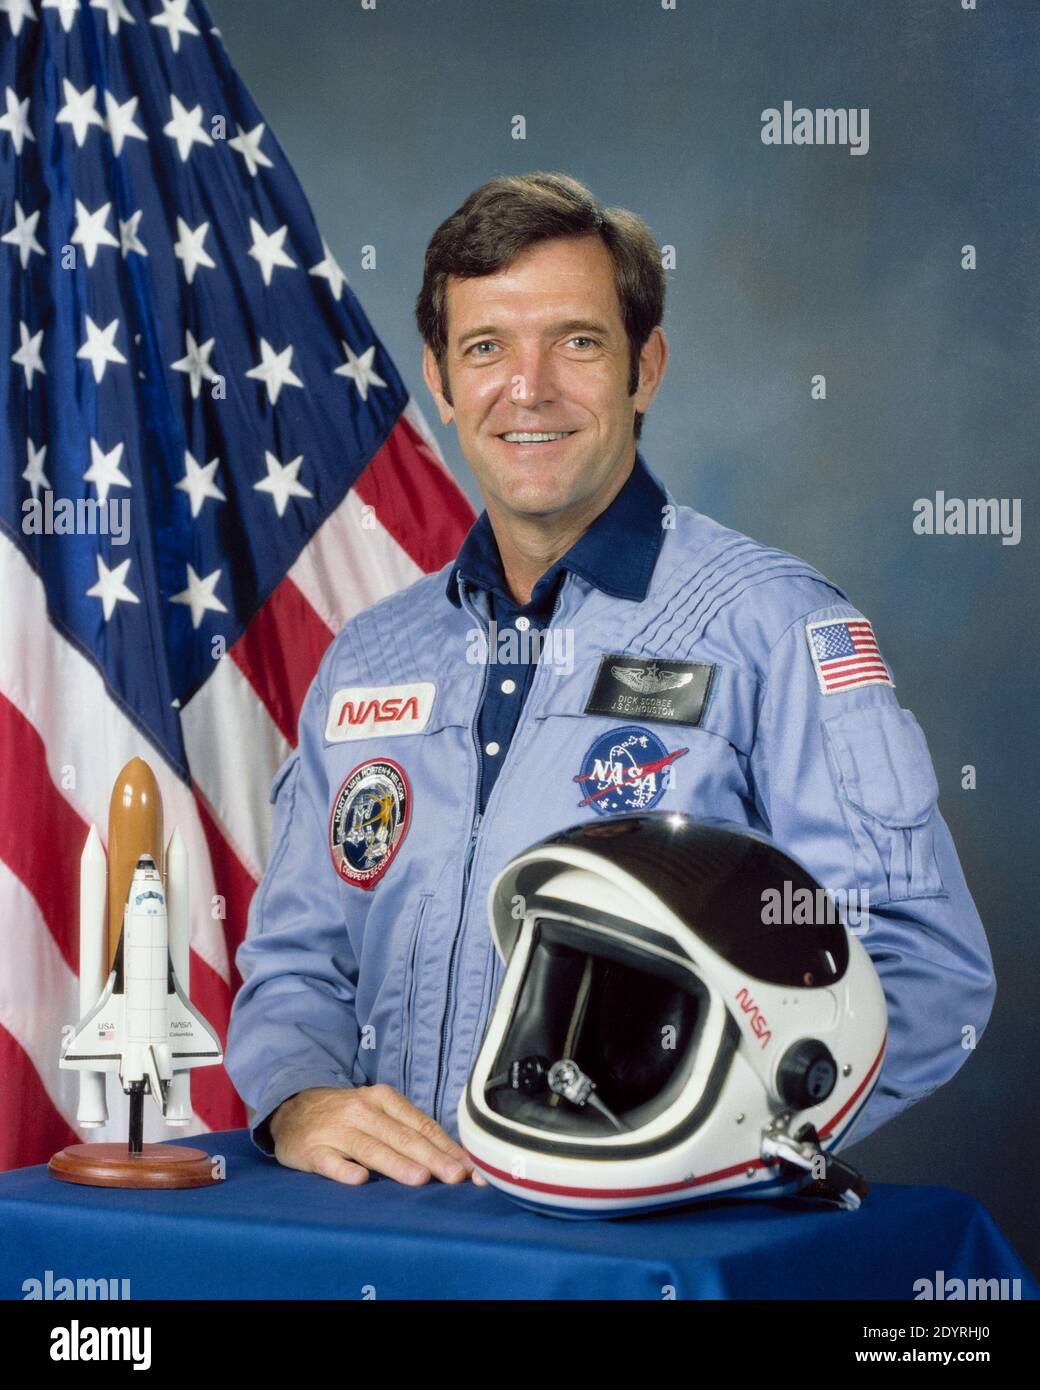 Francis Richard Scobee (May 19, 1939 – January 28, 1986) American pilot, engineer and astronaut. He was killed while he was commanding the Space Shuttle Challenger in 1986, which suffered catastrophic booster failure during launch of the STS-51-L mission. Stock Photo